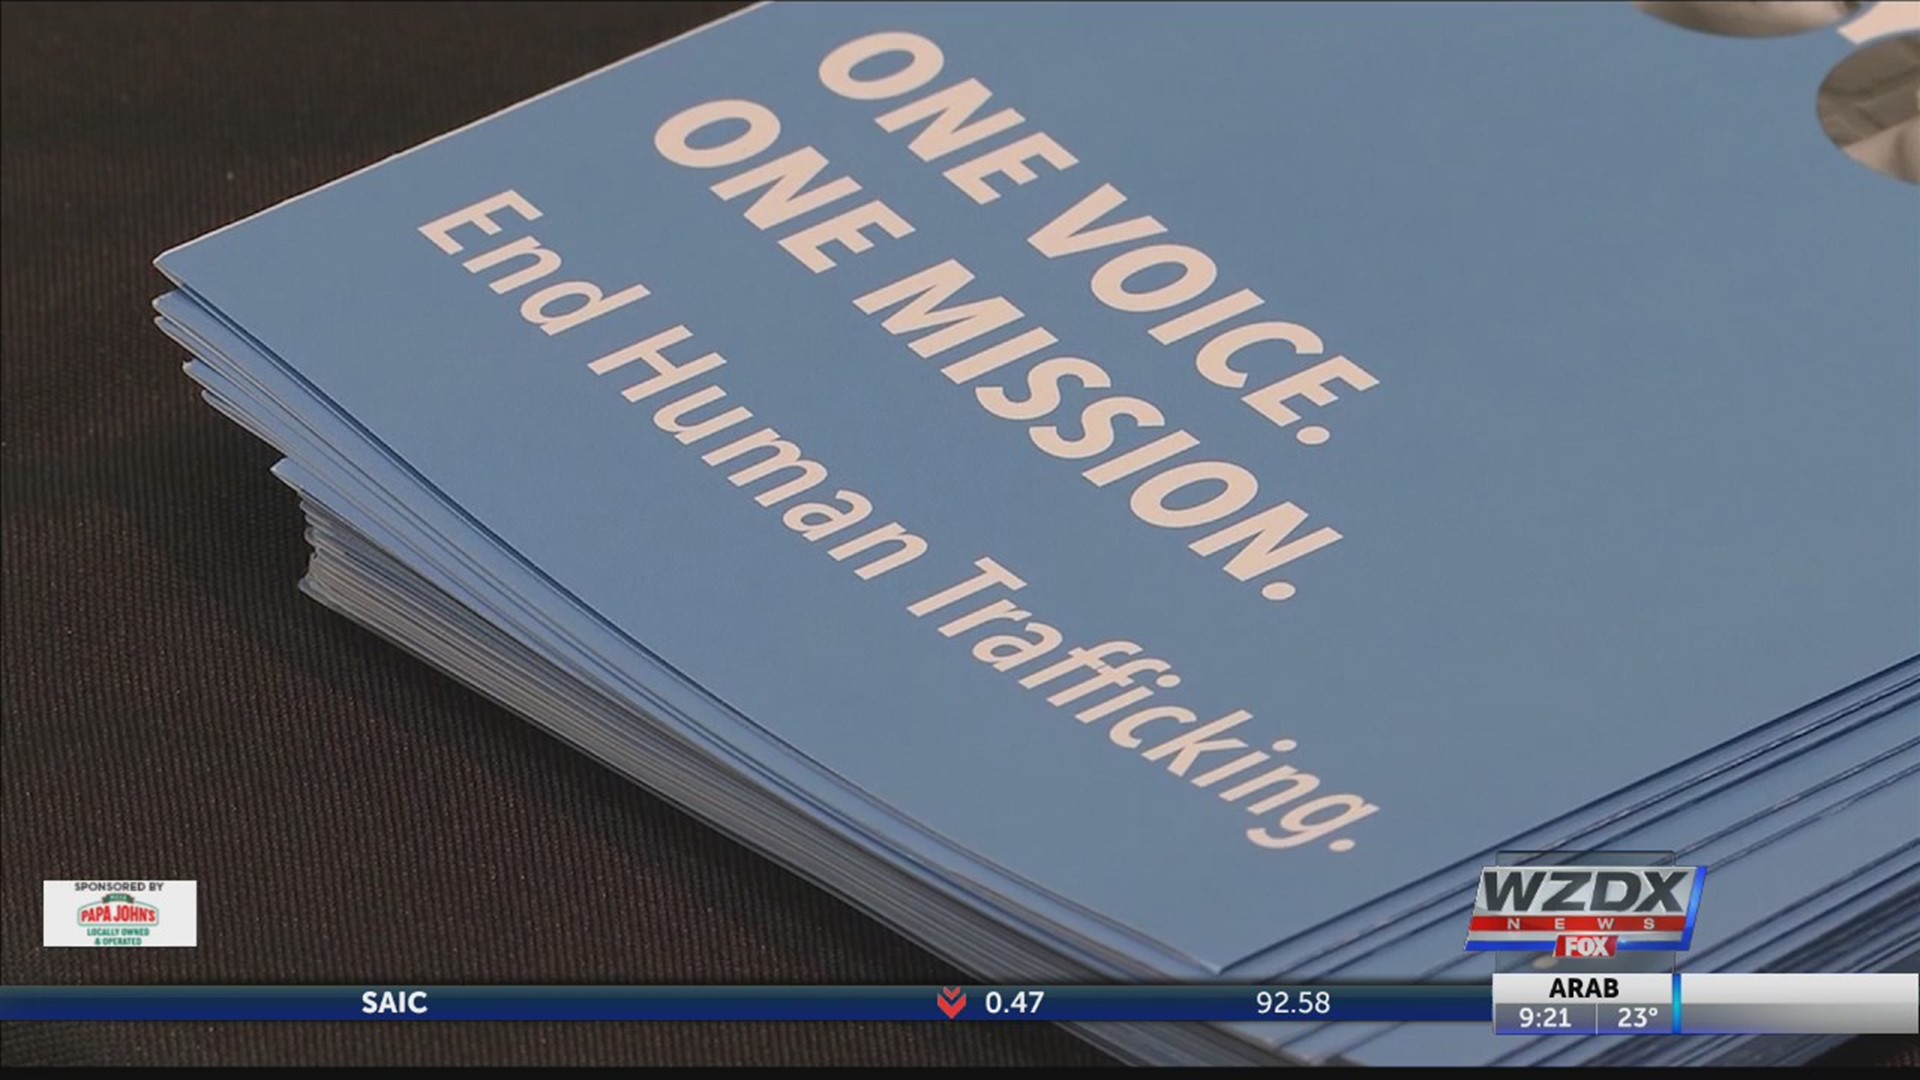 Human trafficking is unknown to a large number of people, and with January being Human Trafficking Awareness Month, the Junior League of Birmingham is trying to spread the word.